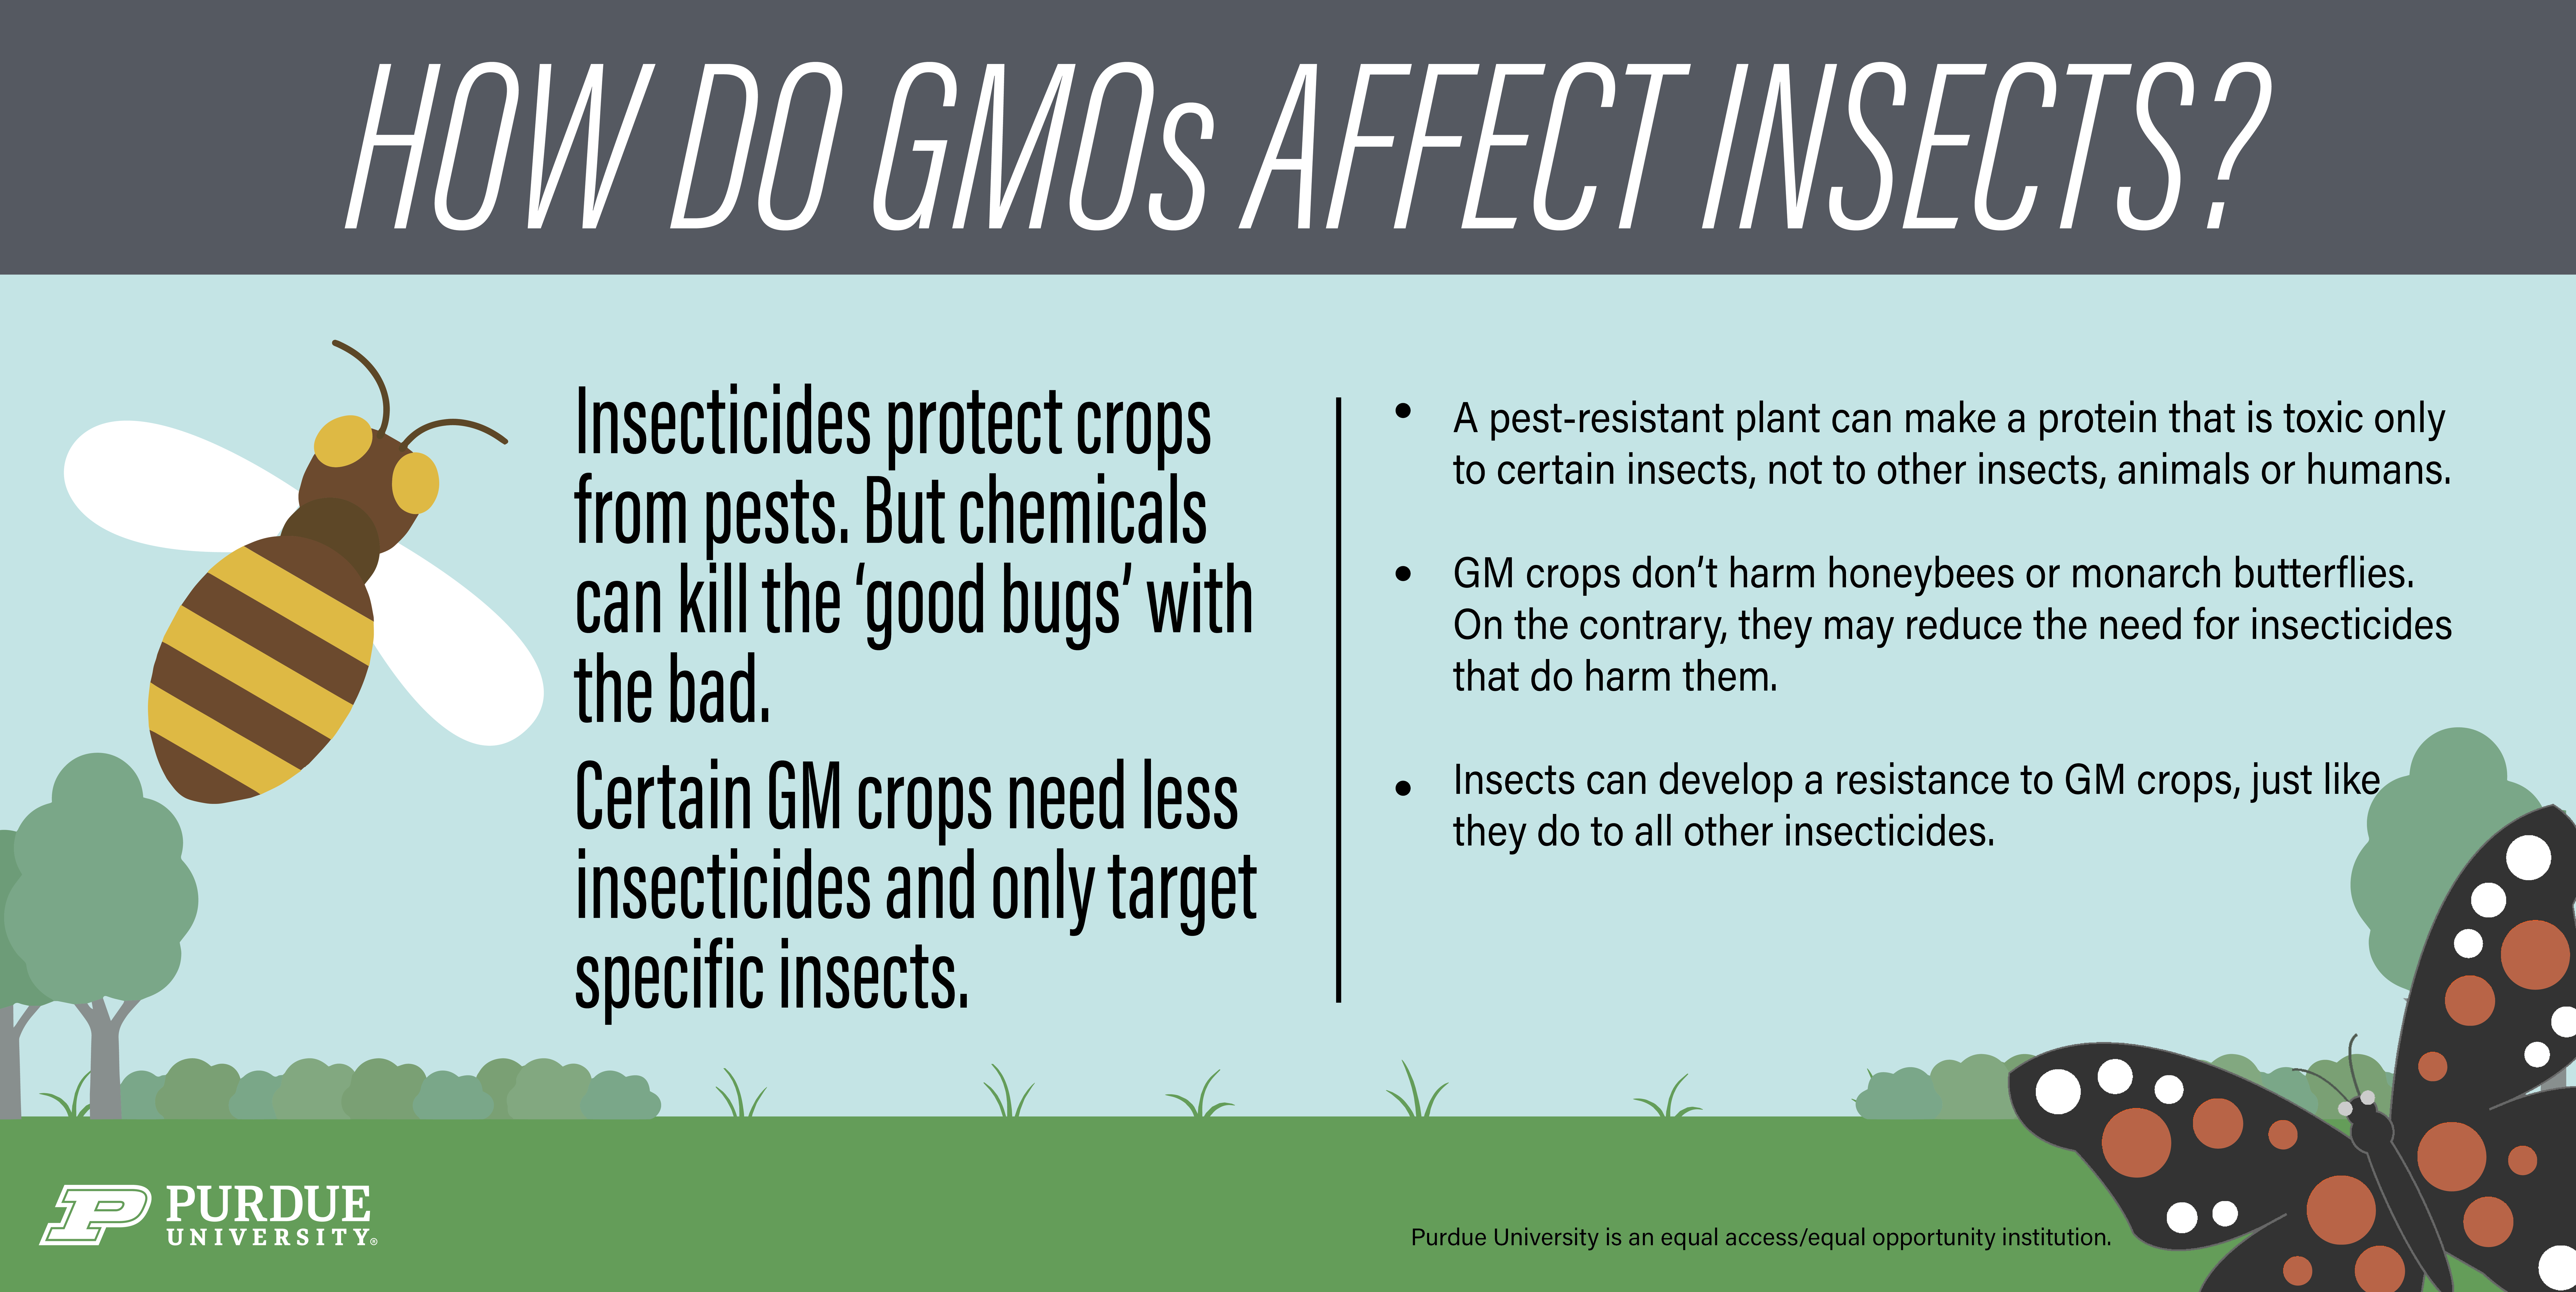 How do GMO's affects insects. Insecticides protect crops from pests. But chemicals can kill the ‘good bugs’ with the bad. Certain GM crops need less insecticides and only target specific insects.